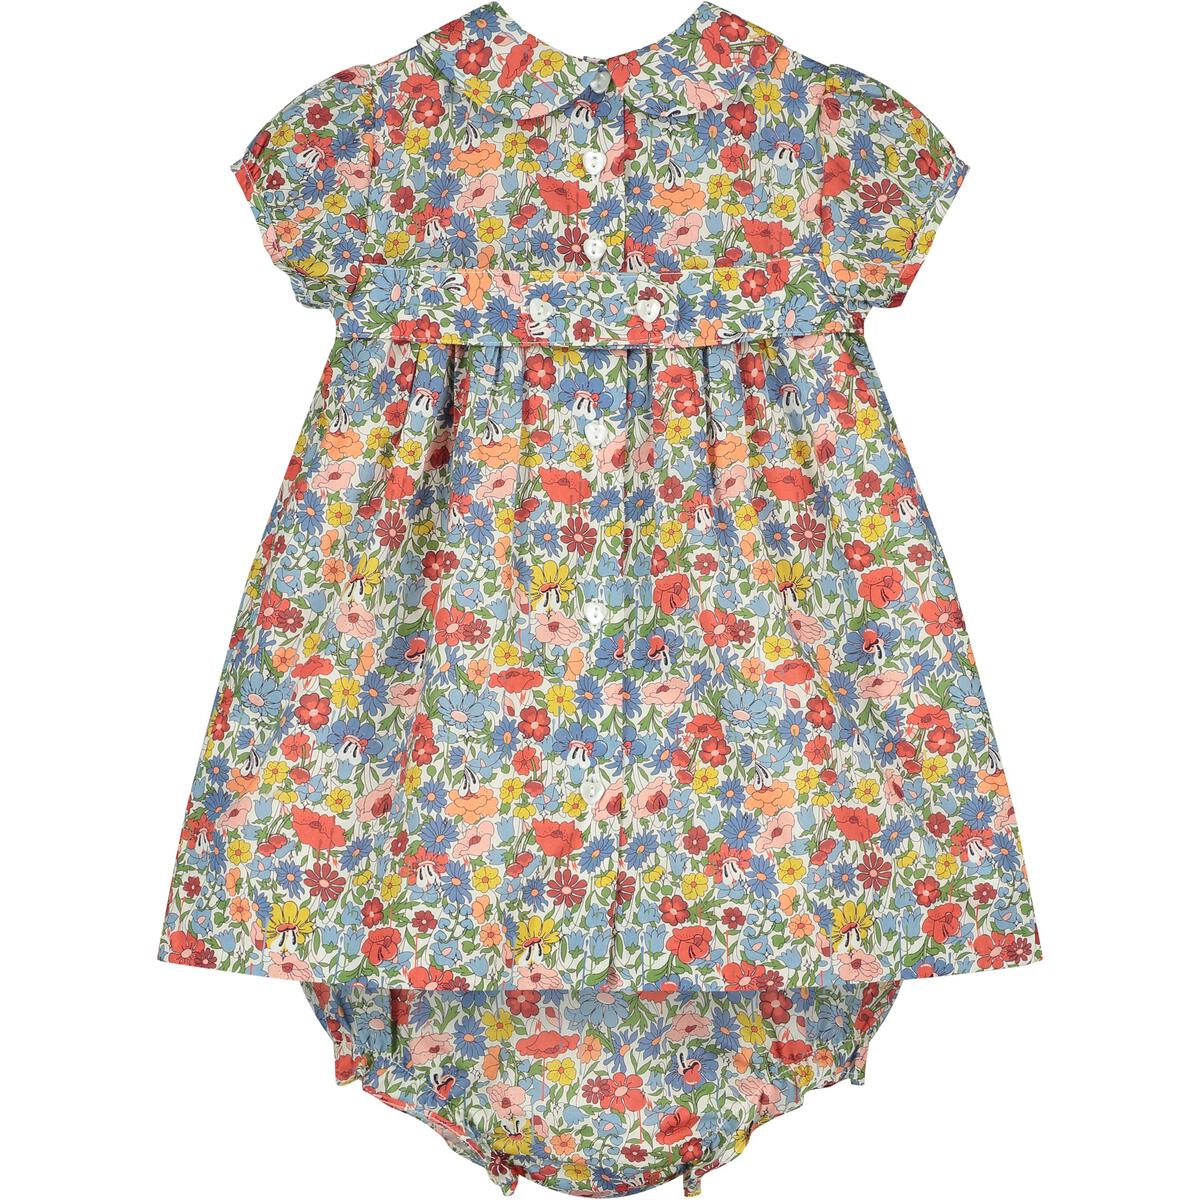 Eris Smocked Baby dress with heart buttons and matching floral bloomers. 